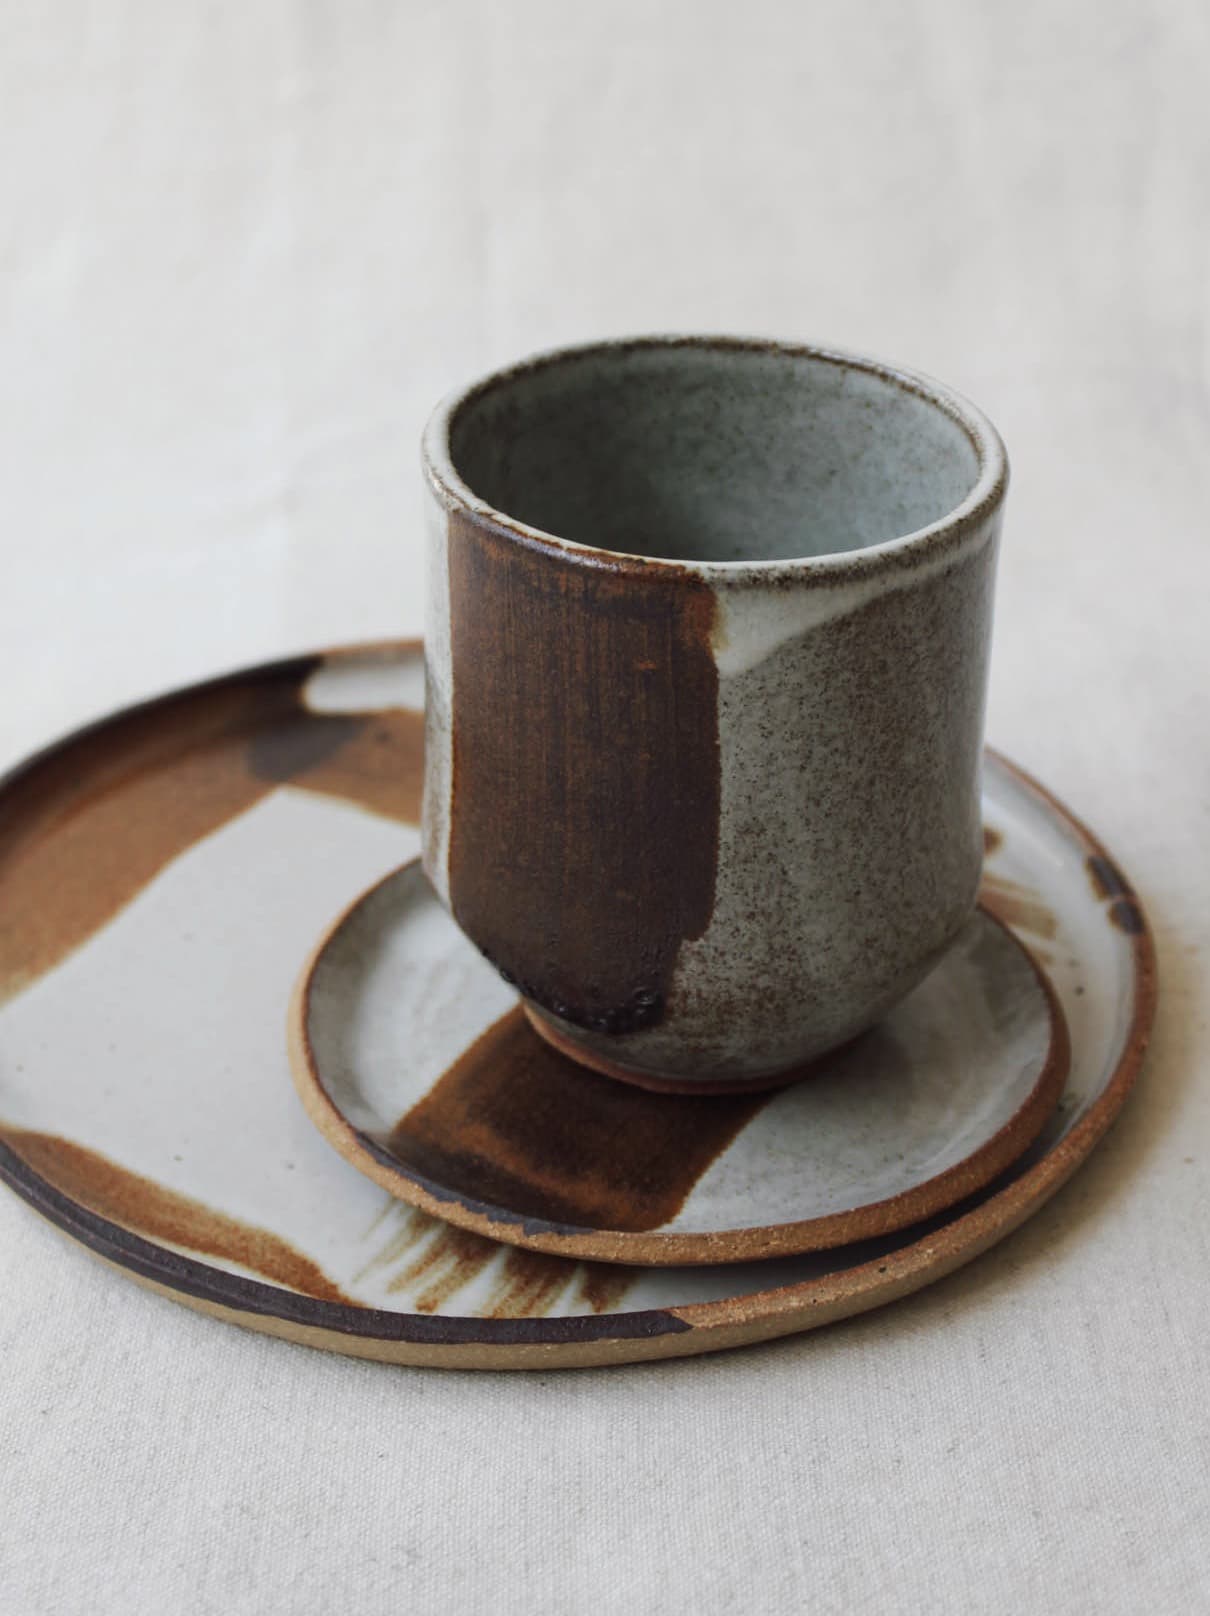 ceramic tableware decorated with oxide brushstrokes available for prop hire in berlin